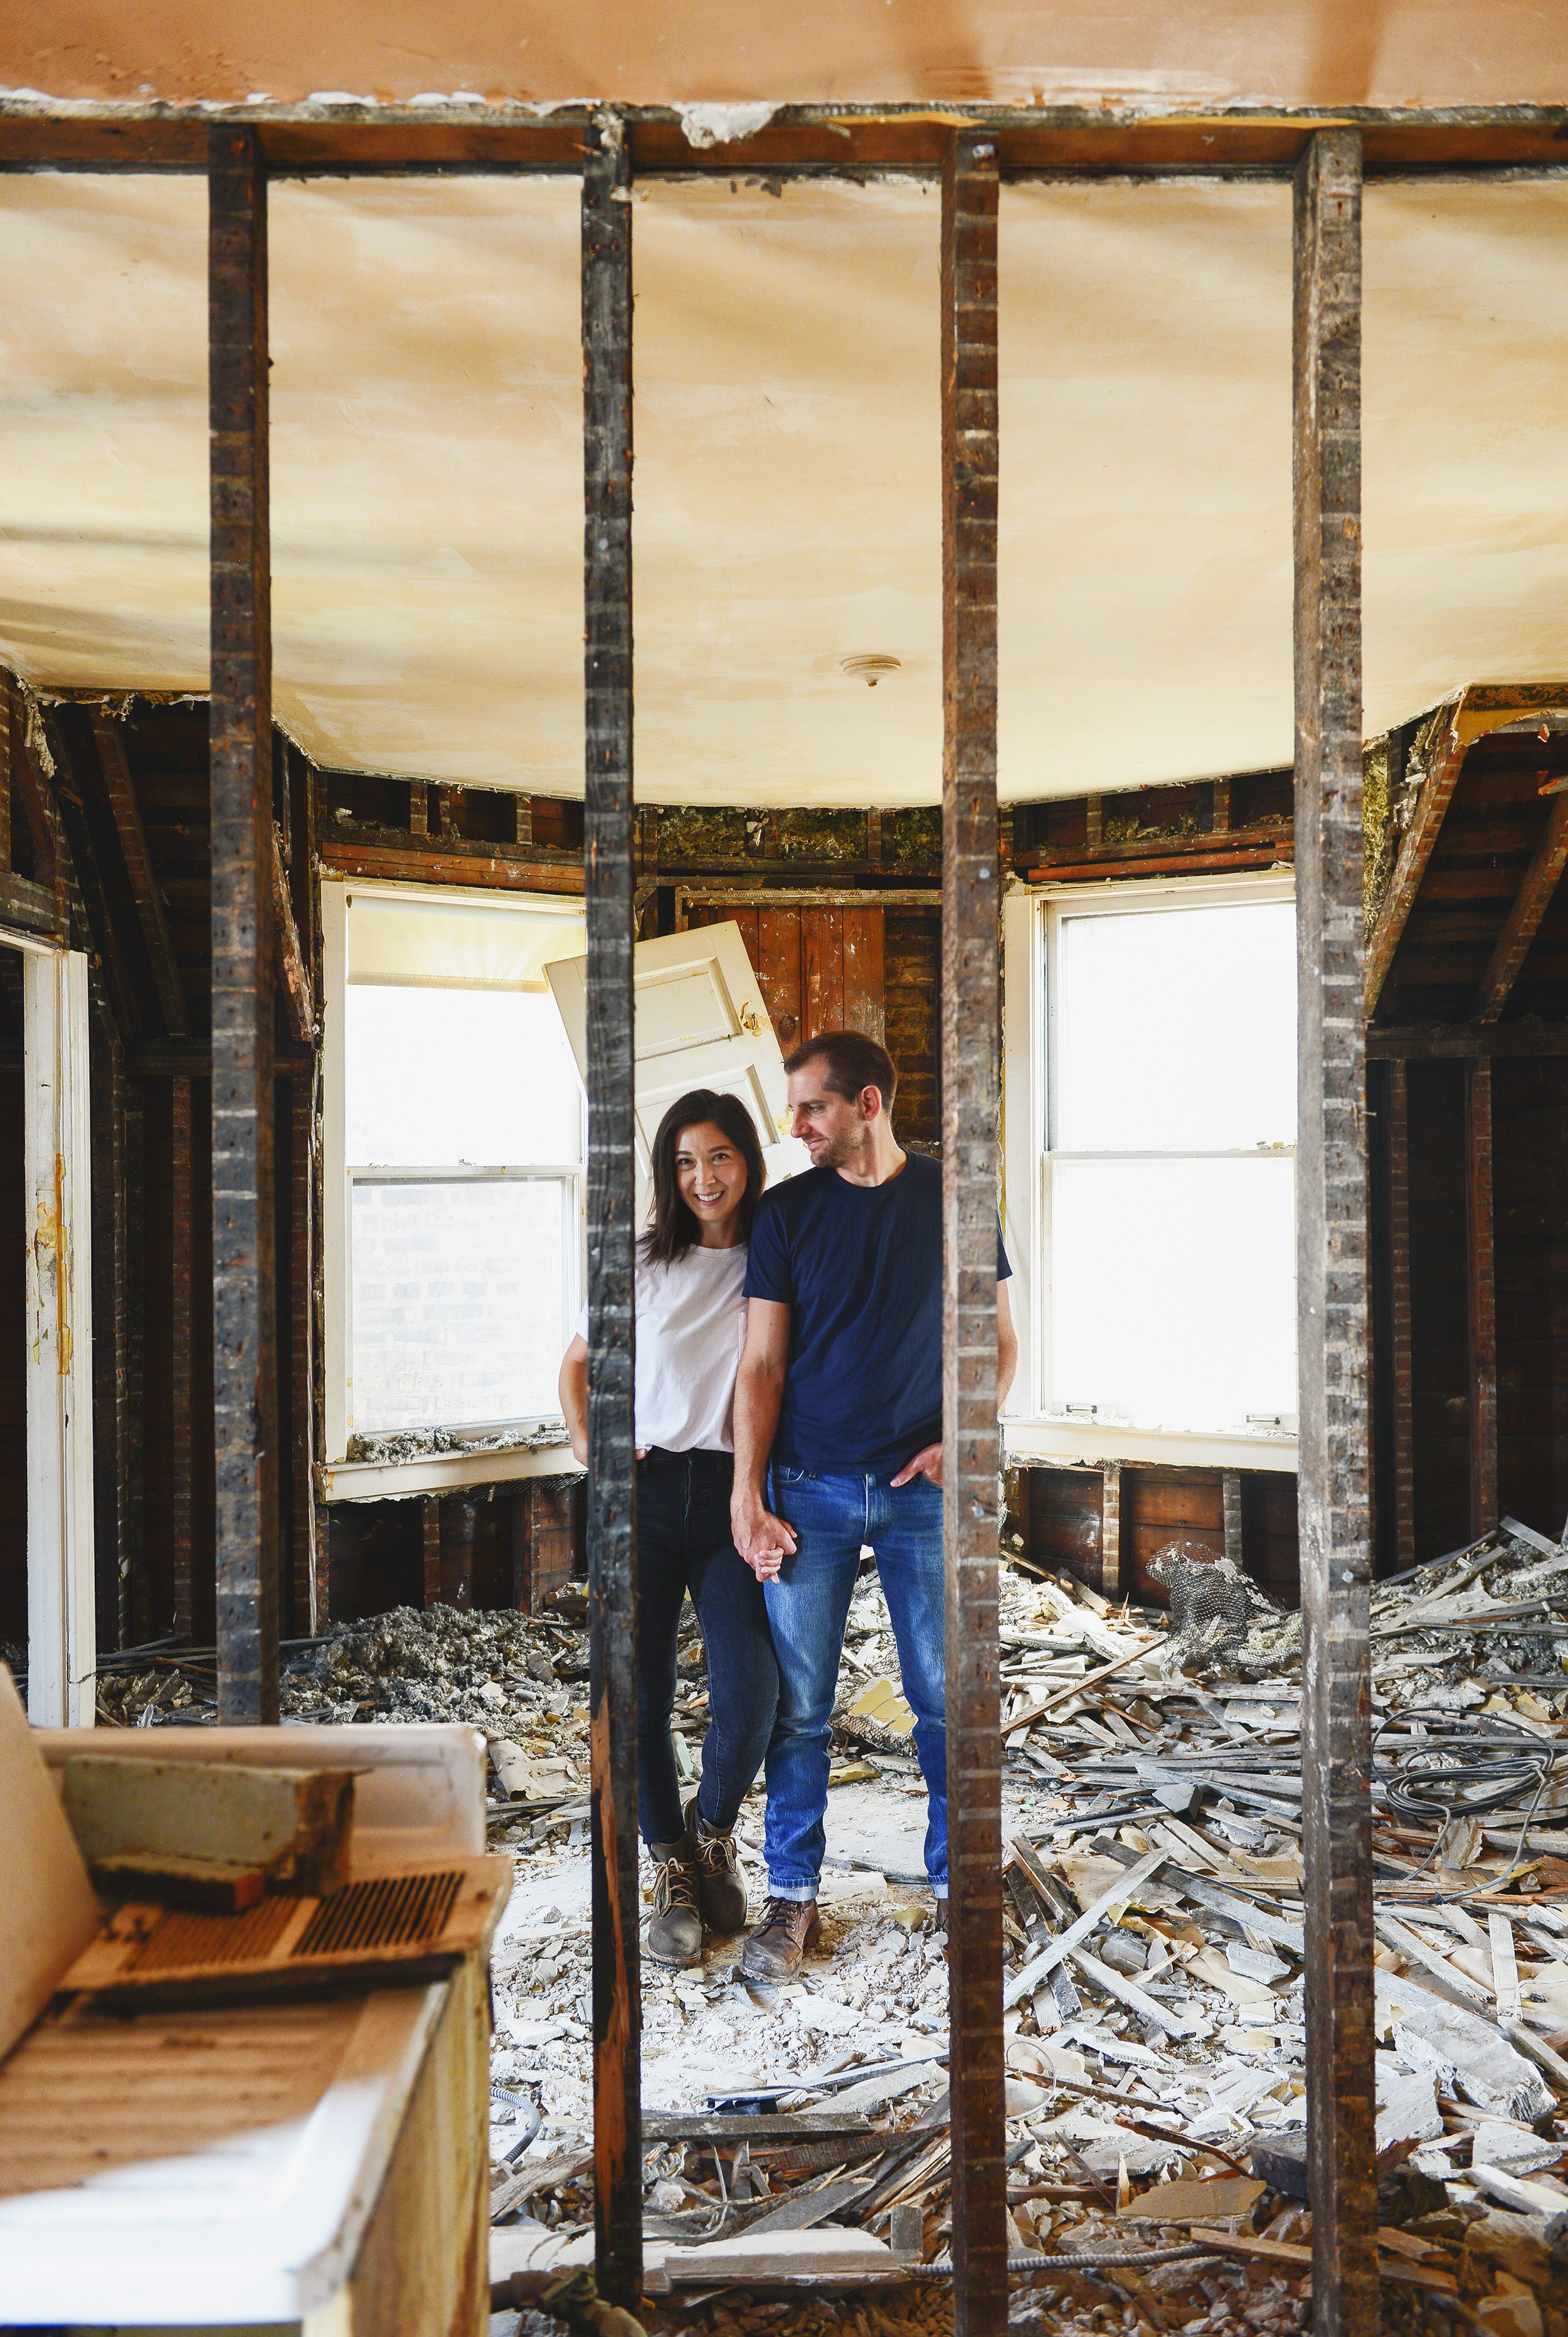 Kim and Scott standing on a pile of rubble inside the Two Flat with exposed wall studs in the foreground | Our goals for 2020, the best is yet to come! via Yellow Brick Home